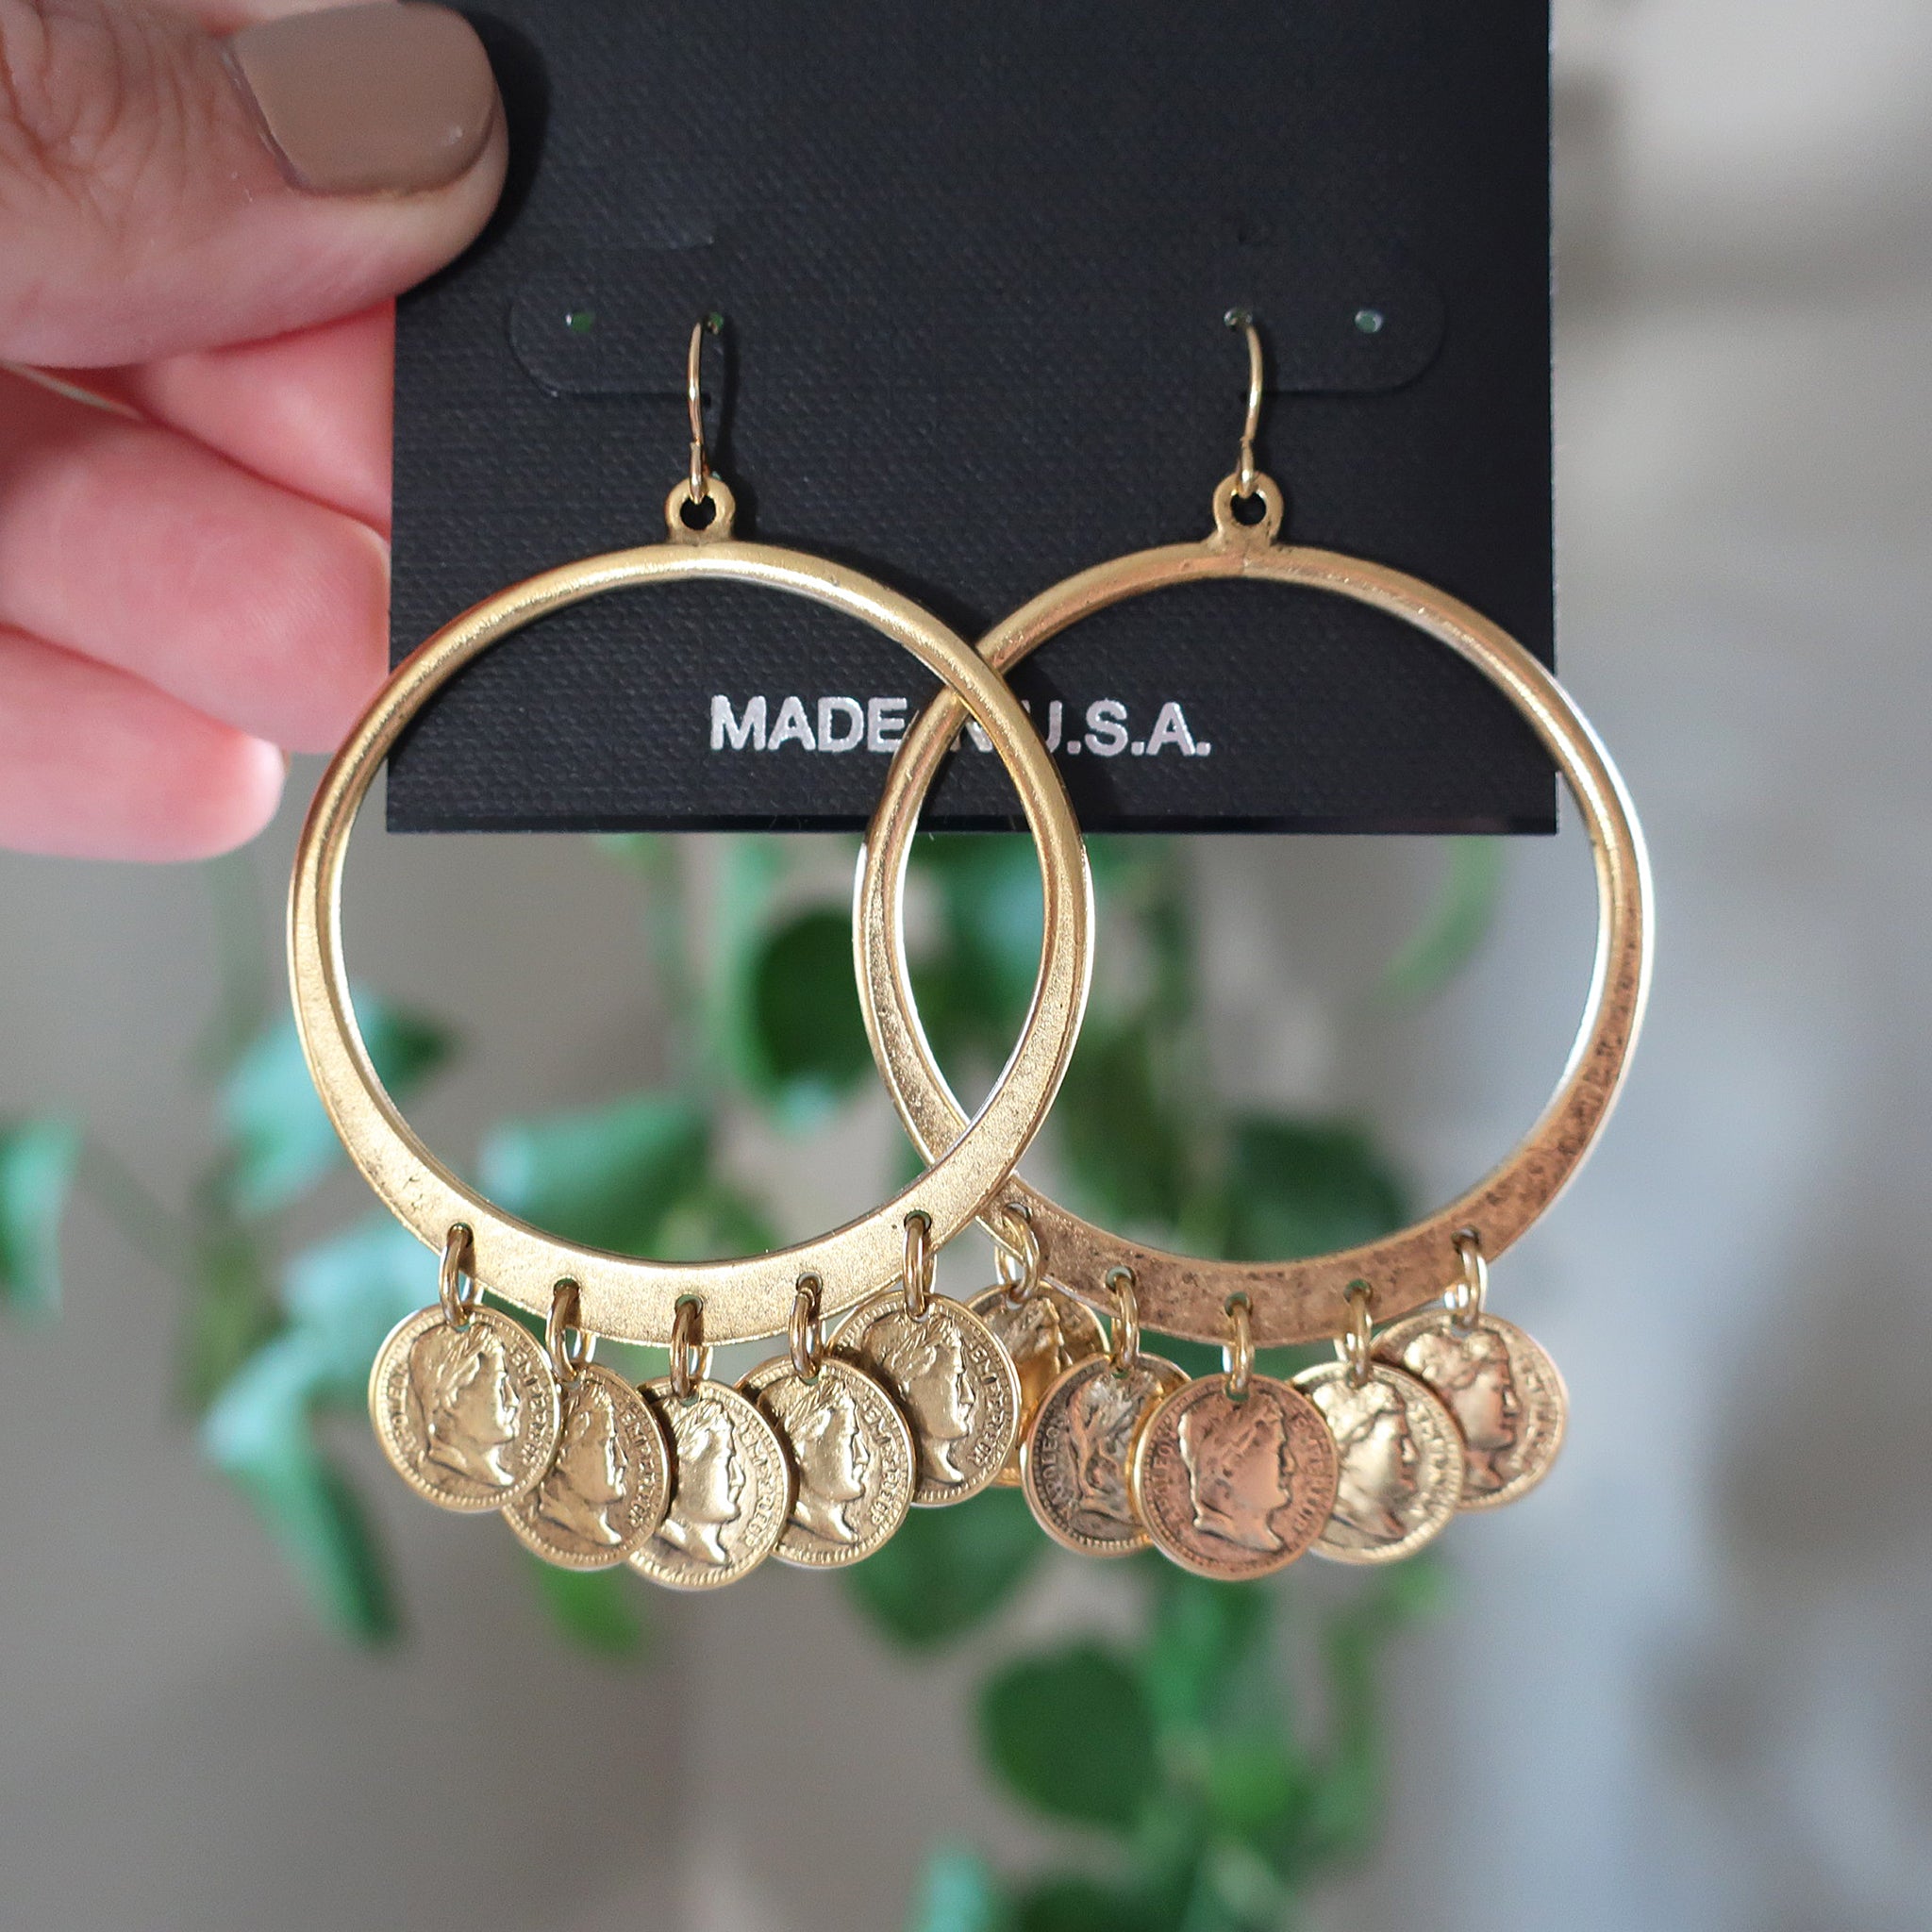 Yochi NY Ambrosio Large Statement Hoop Coin Charm Earrings in 22k Gold